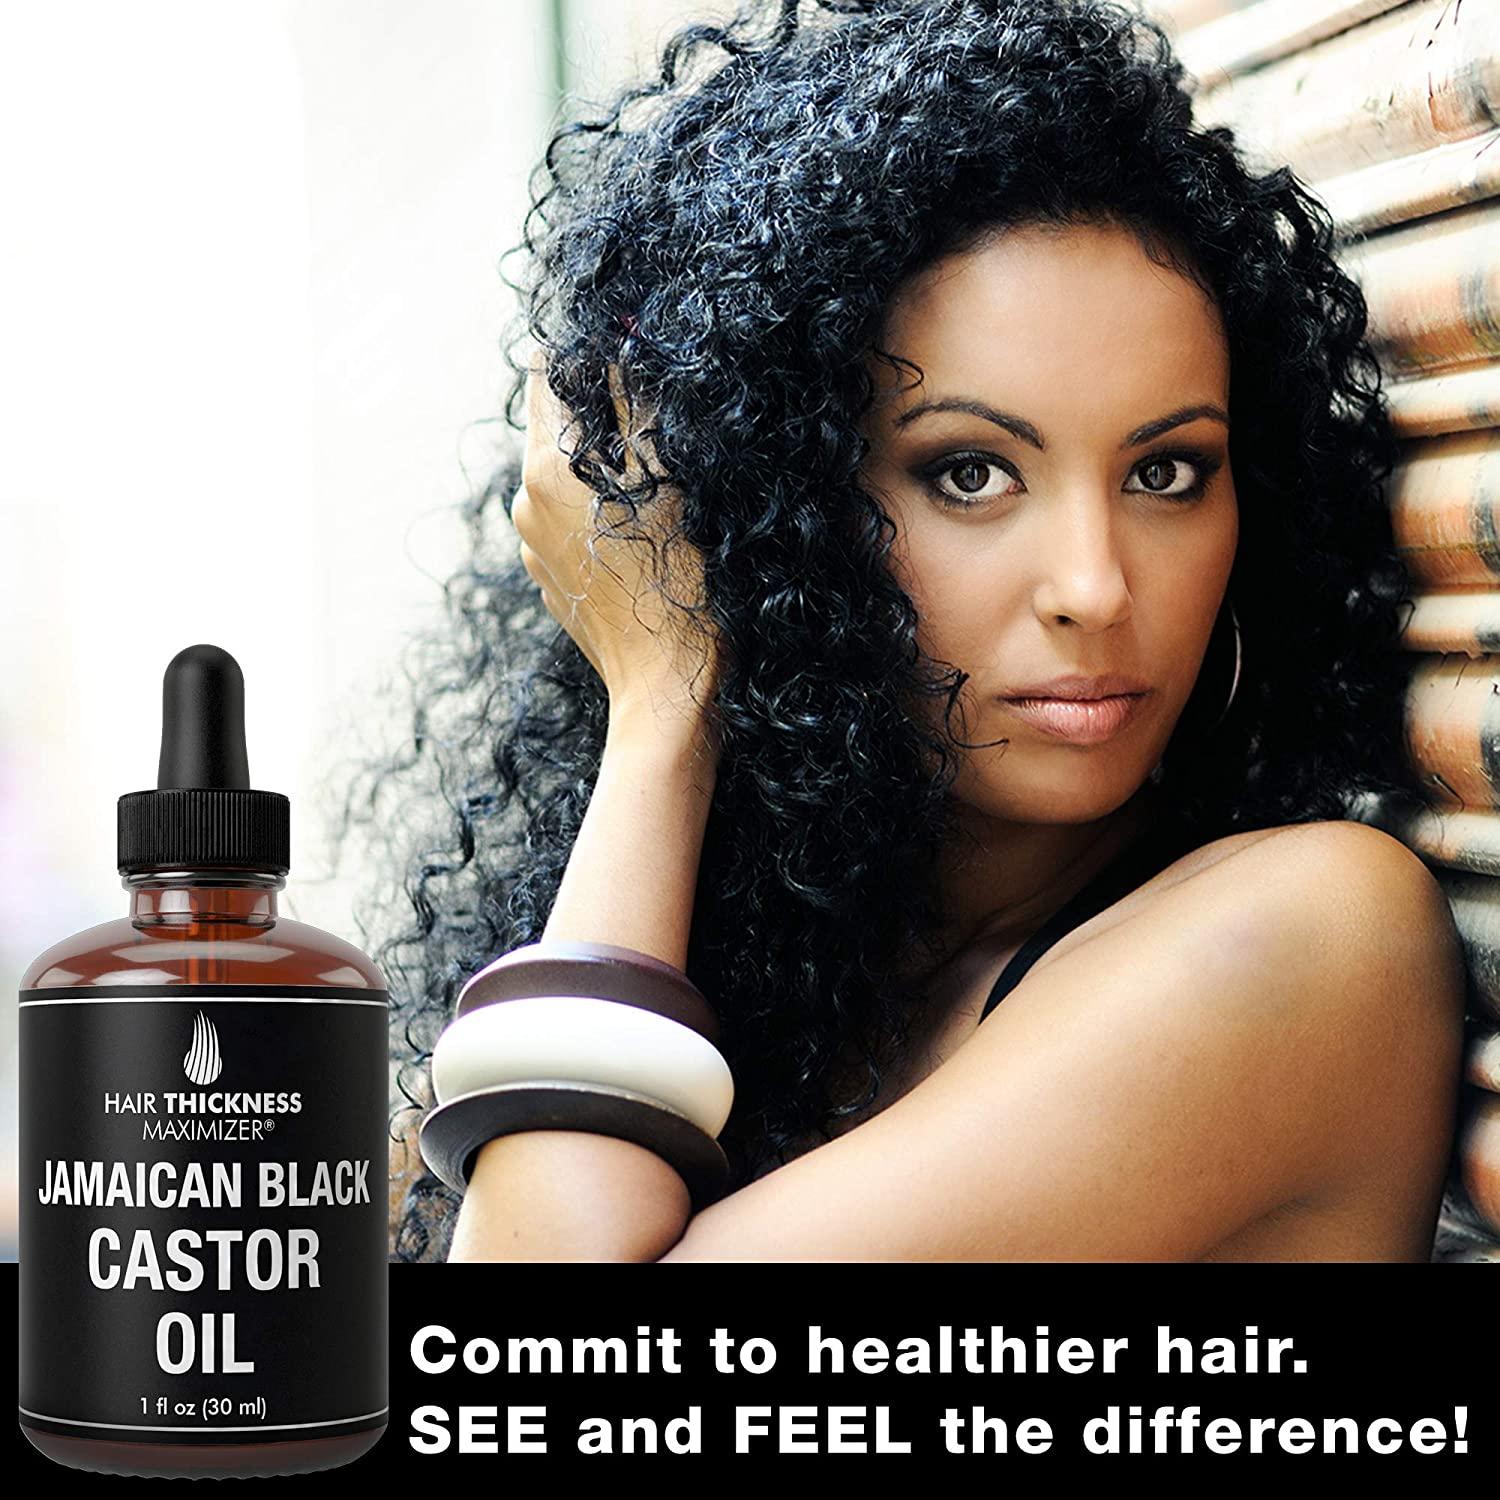 Jamaican Black Castor Oil (1fl Oz) by Hair Thickness Maximizer. Pure  Unrefined Oils for Thickening Hair, Eyelashes, Eyebrows. Avoid Hair Loss,  Thinning Hair for Men and Women  Fl Oz (Pack of 1)